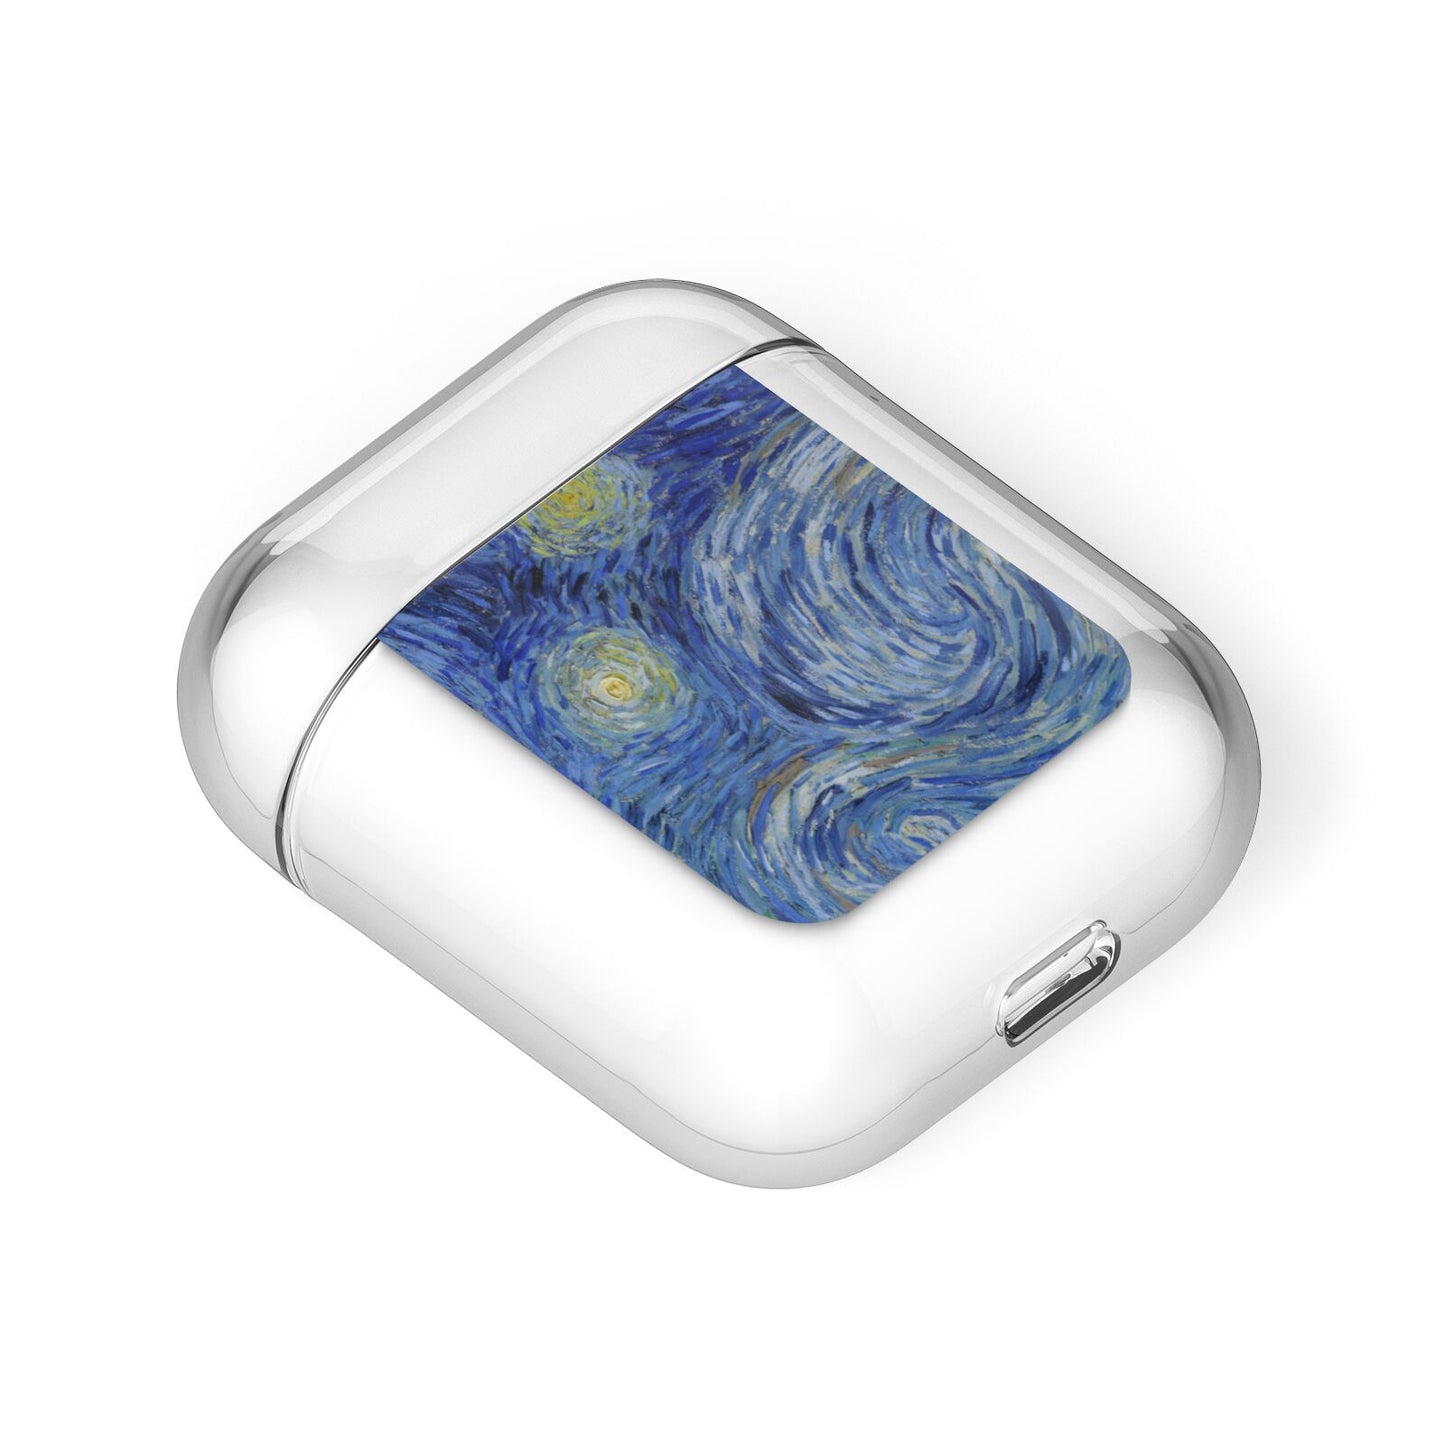 Van Gogh Starry Night AirPods Case Laid Flat